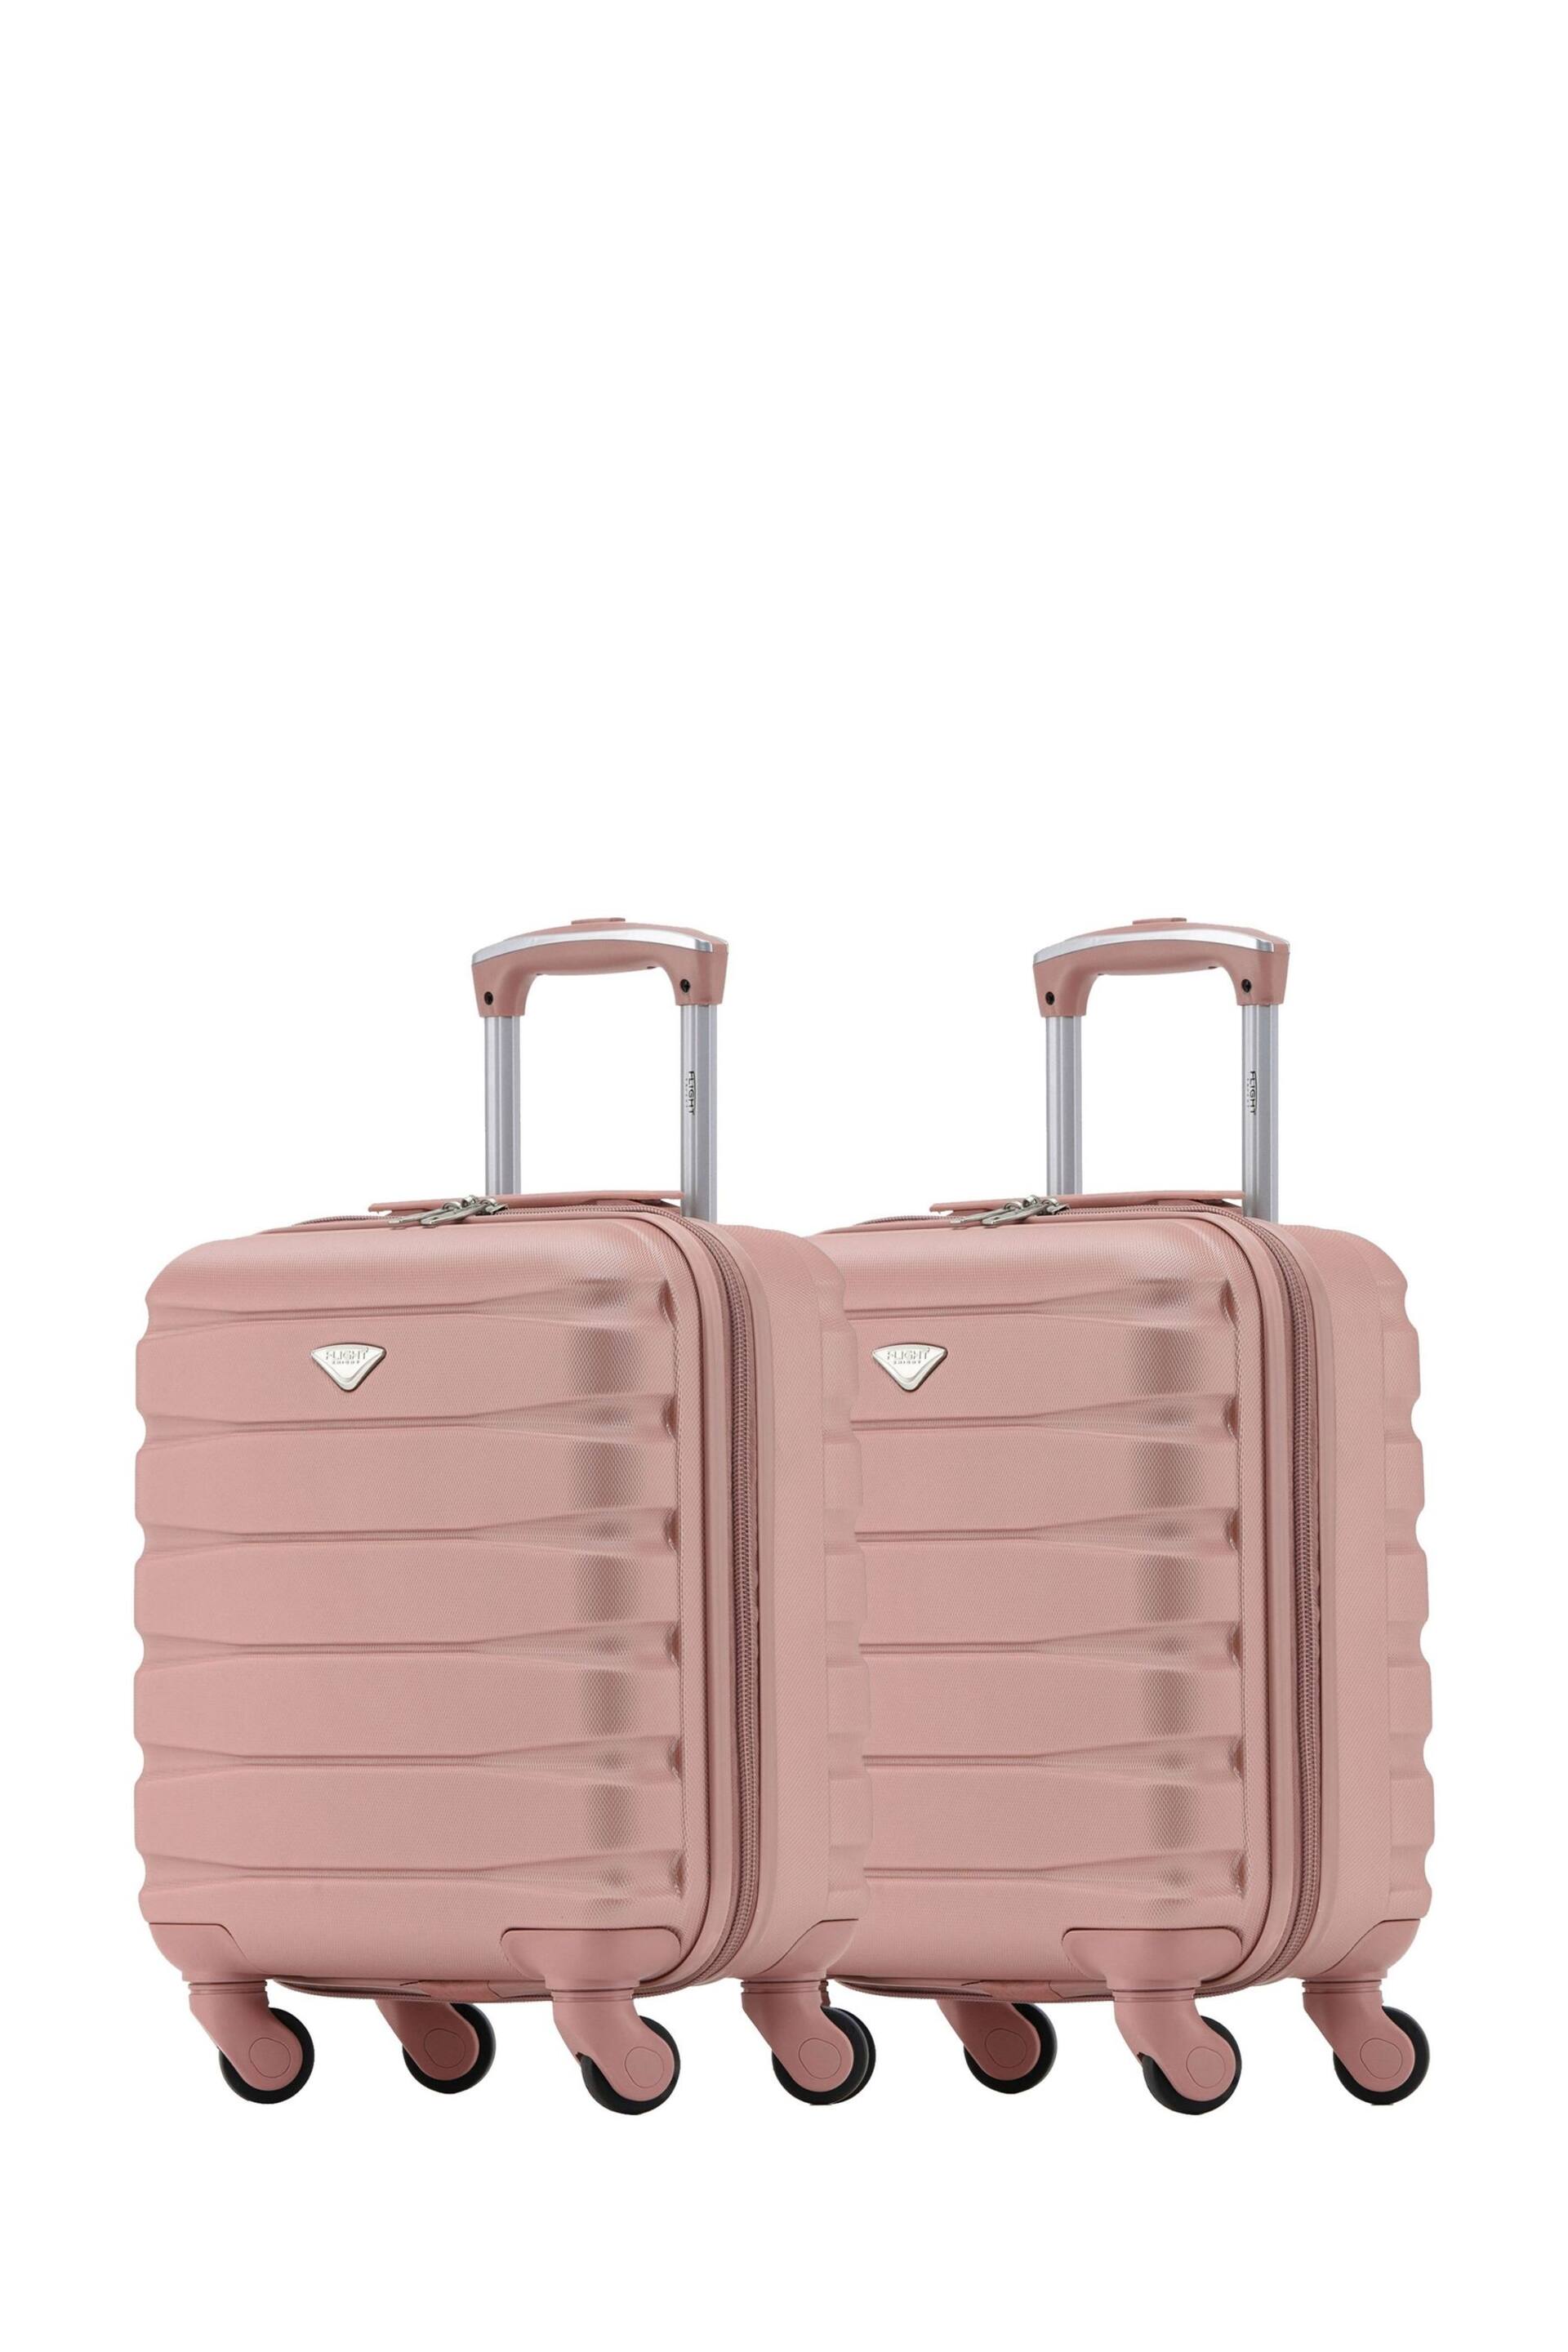 Flight Knight EasyJet Underseat 45x36x20cm 4 Wheel ABS Hard Case Cabin Carry On Suitcase Set Of 2 - Image 7 of 9